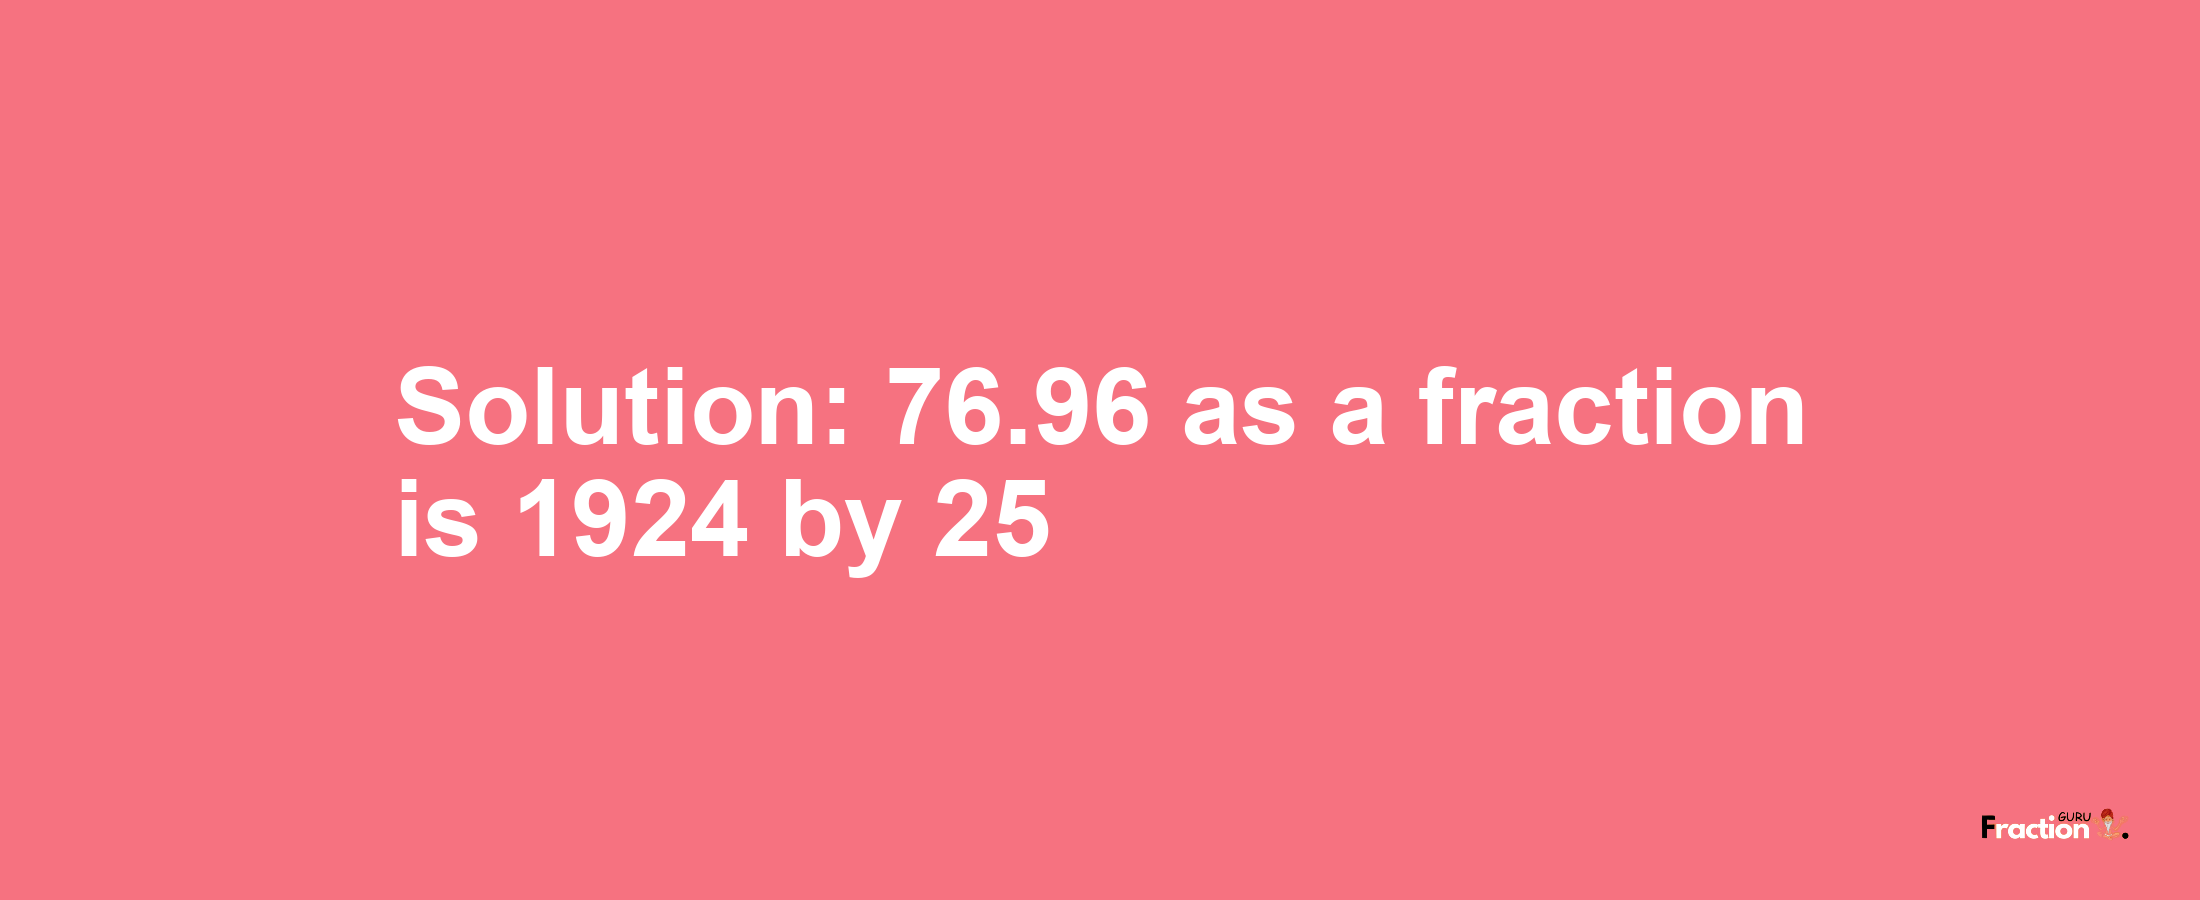 Solution:76.96 as a fraction is 1924/25